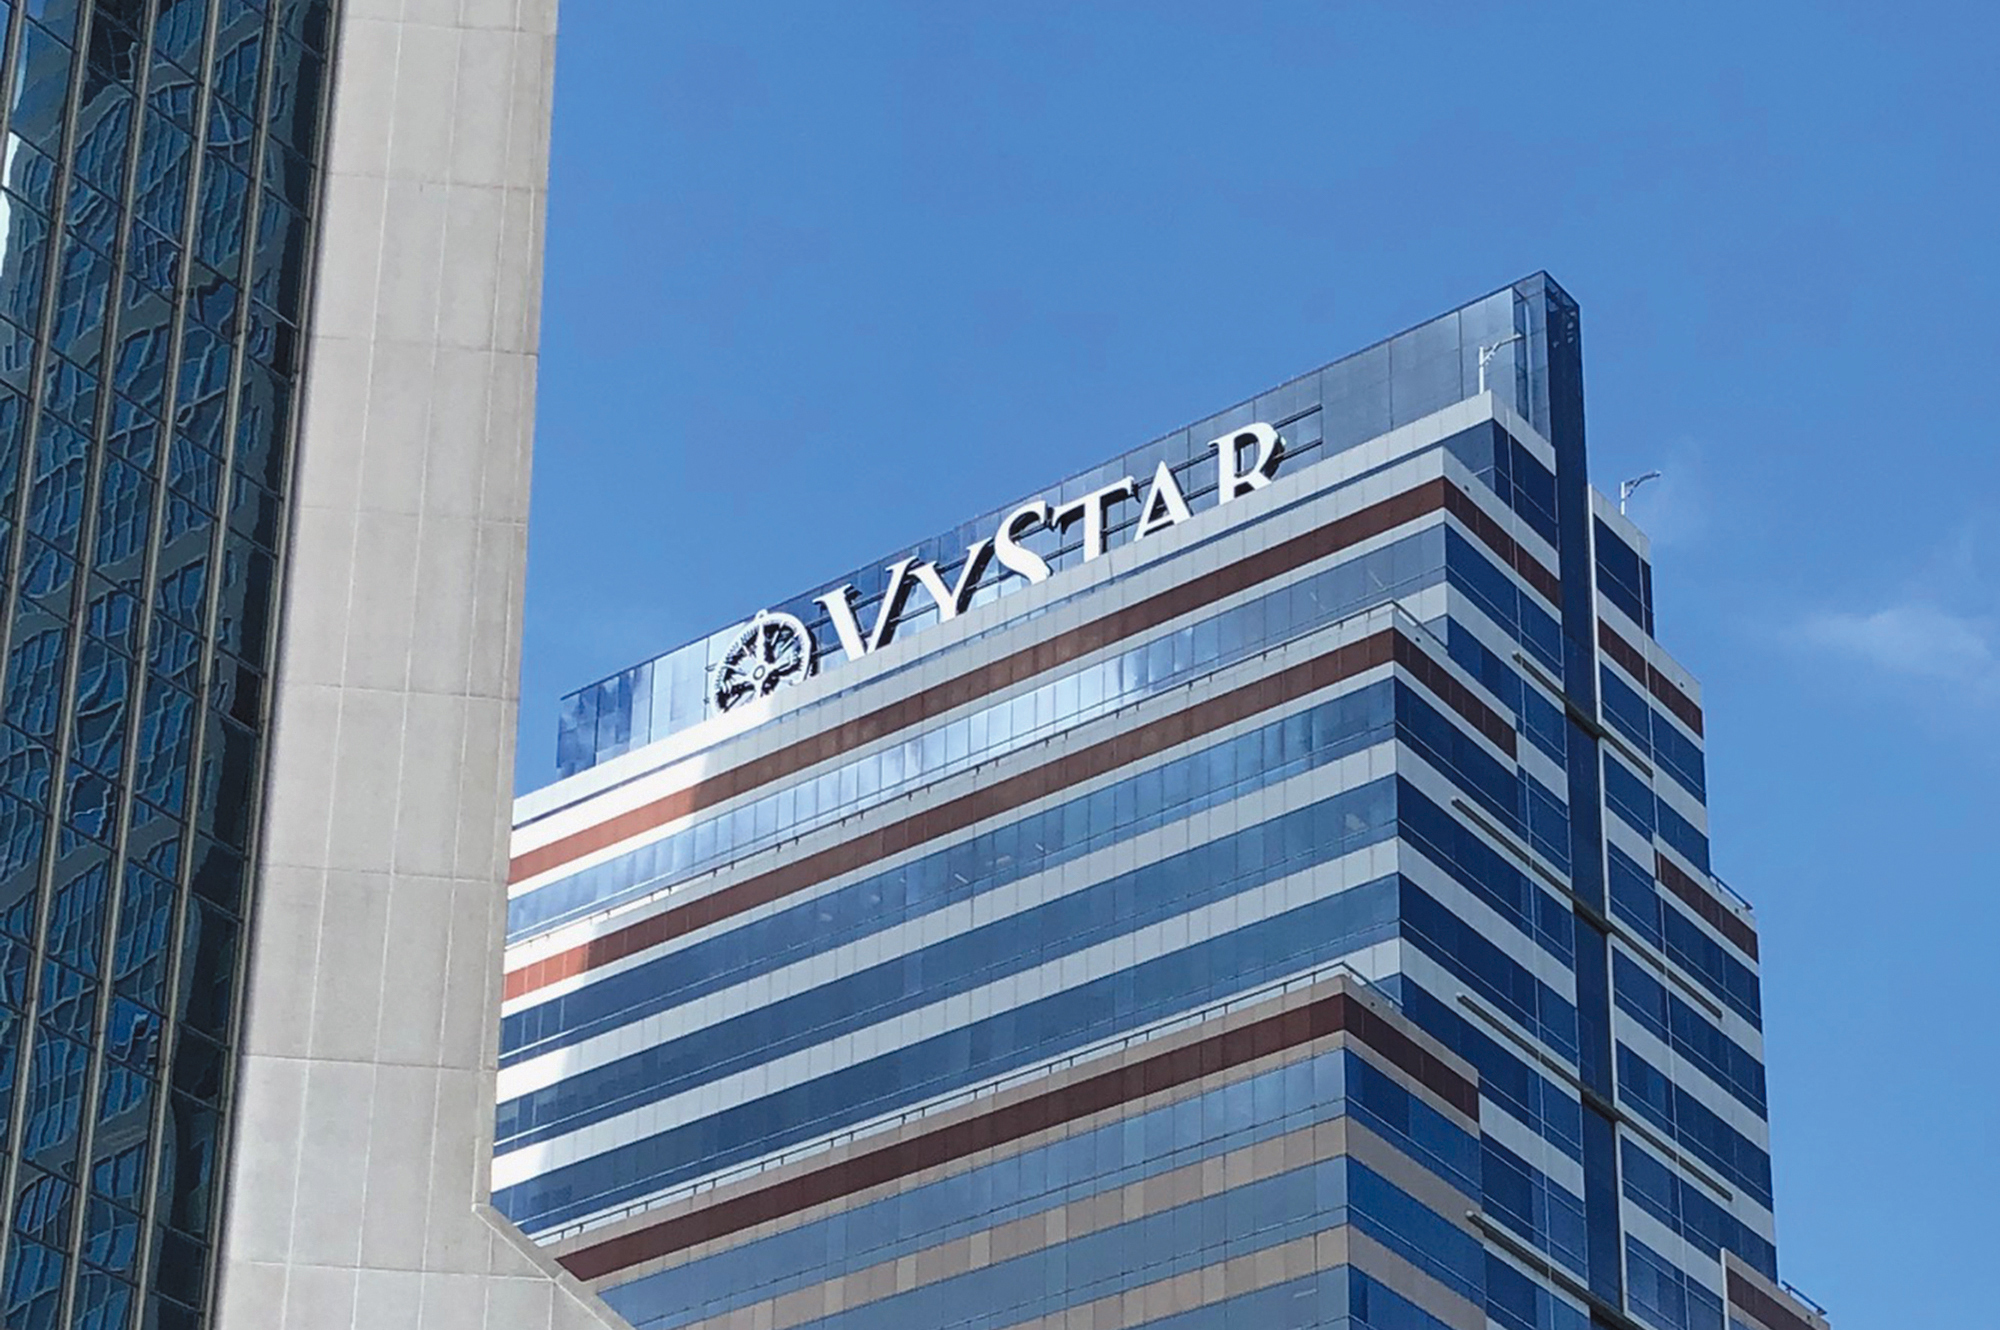 In 2019, VyStar Credit Union saw its name go up on Veterans Memorial Arena and on the Downtown skyline atop 76. S. Laura St., the former SunTrust Tower.